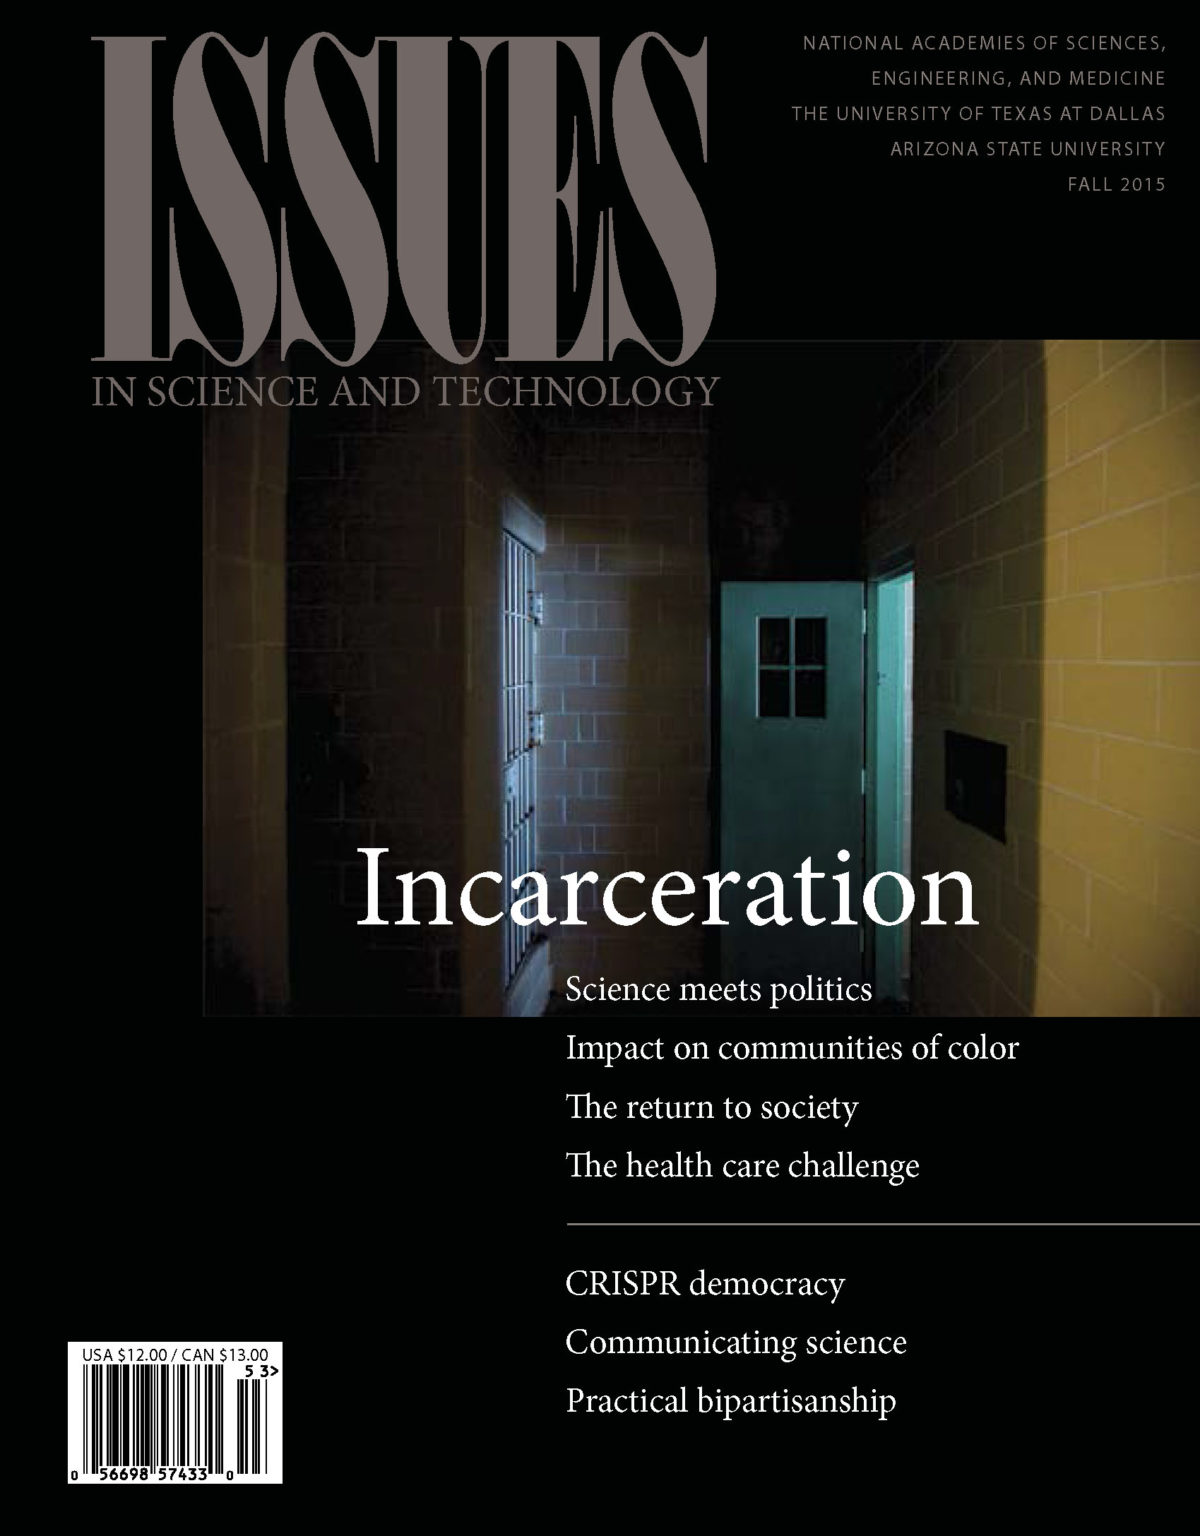 Magazine cover with an open prison door